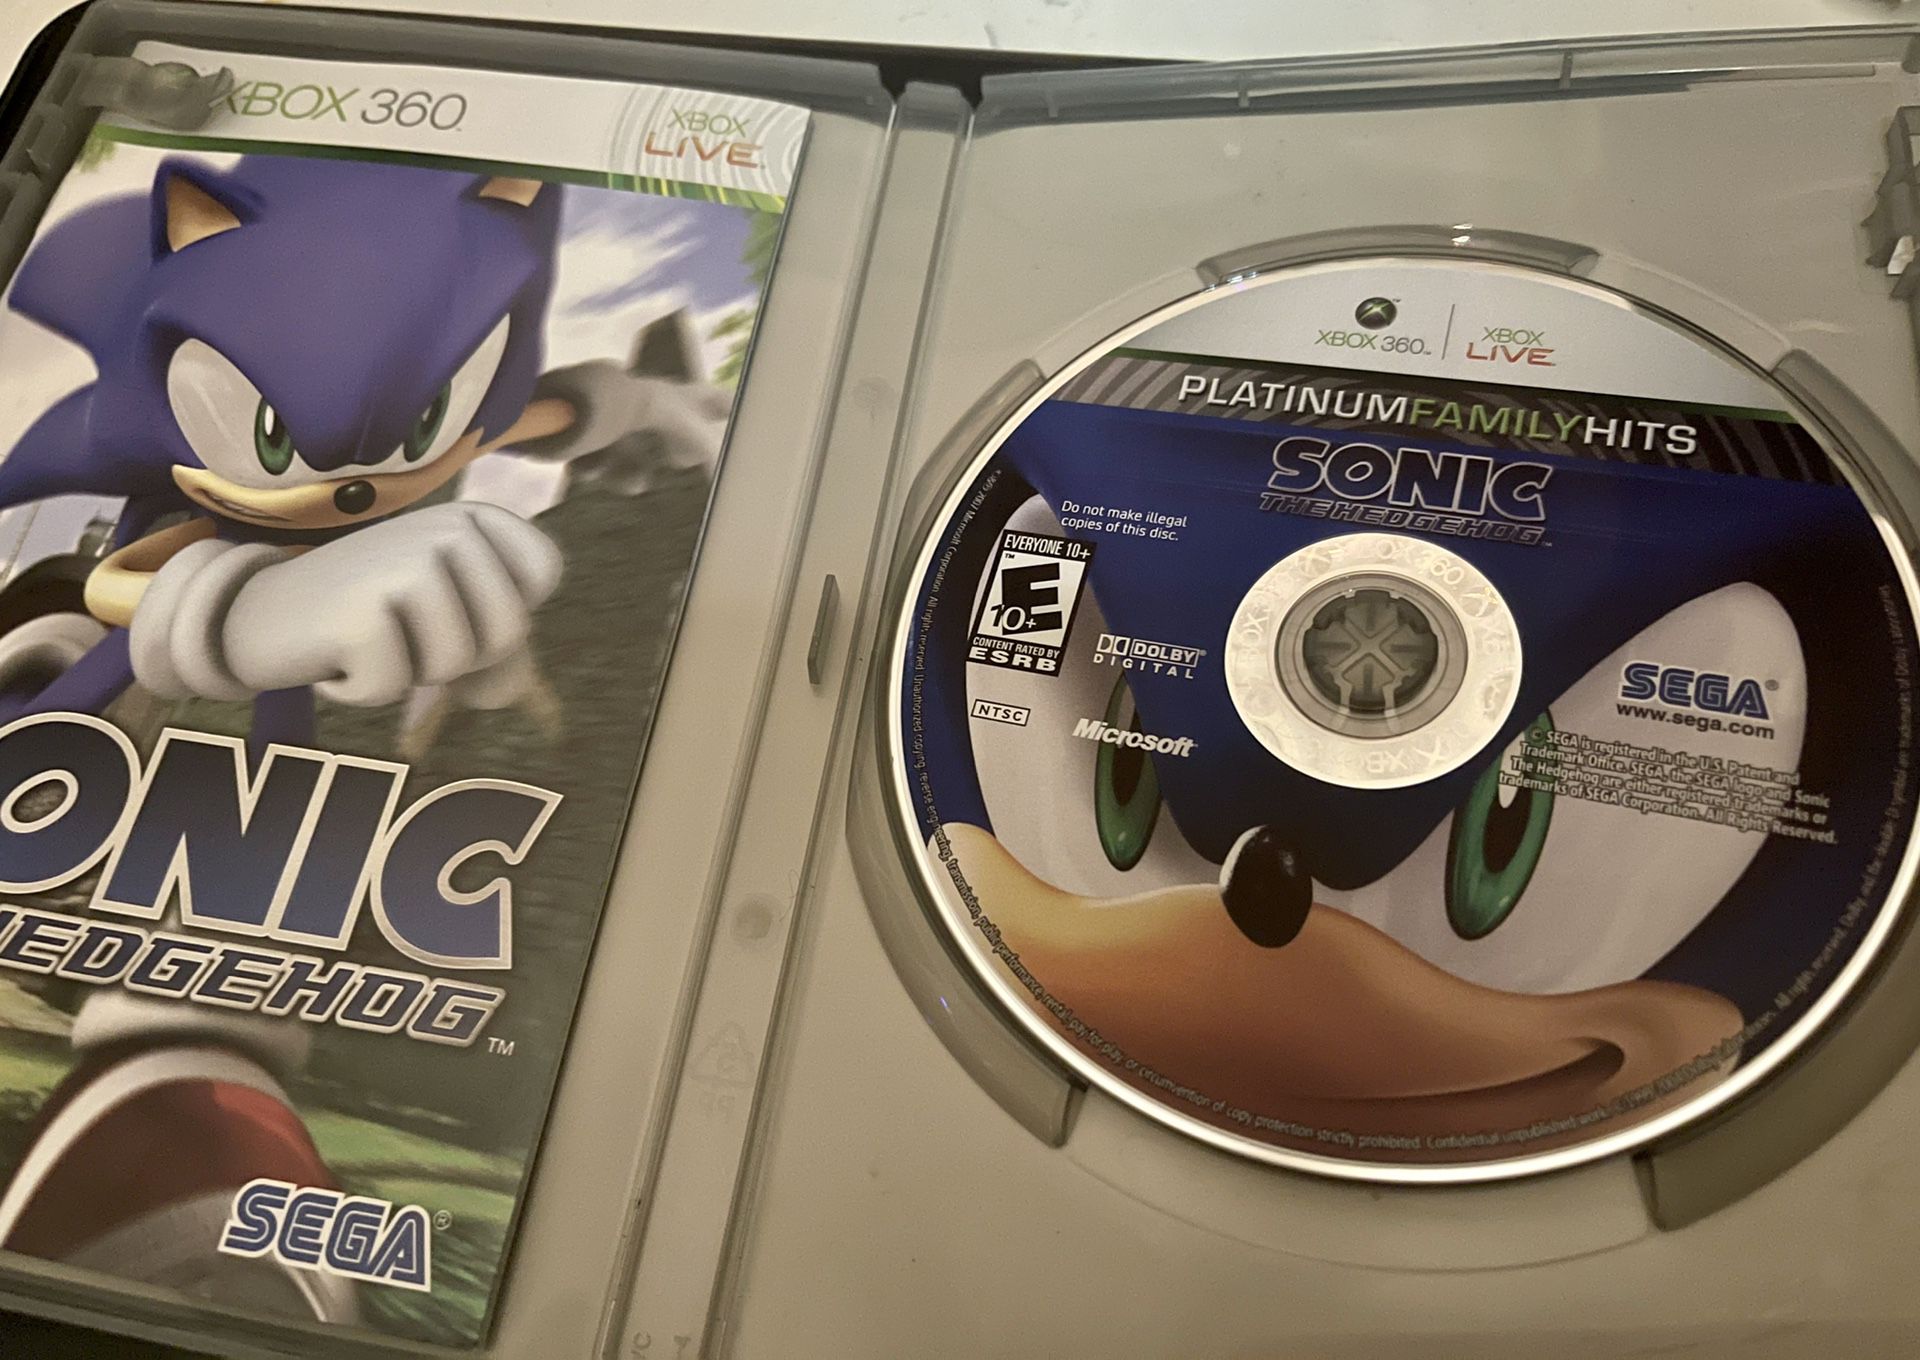 Sonic the Hedgehog (Microsoft Xbox 360, 2006) *TRADE IN YOUR OLD